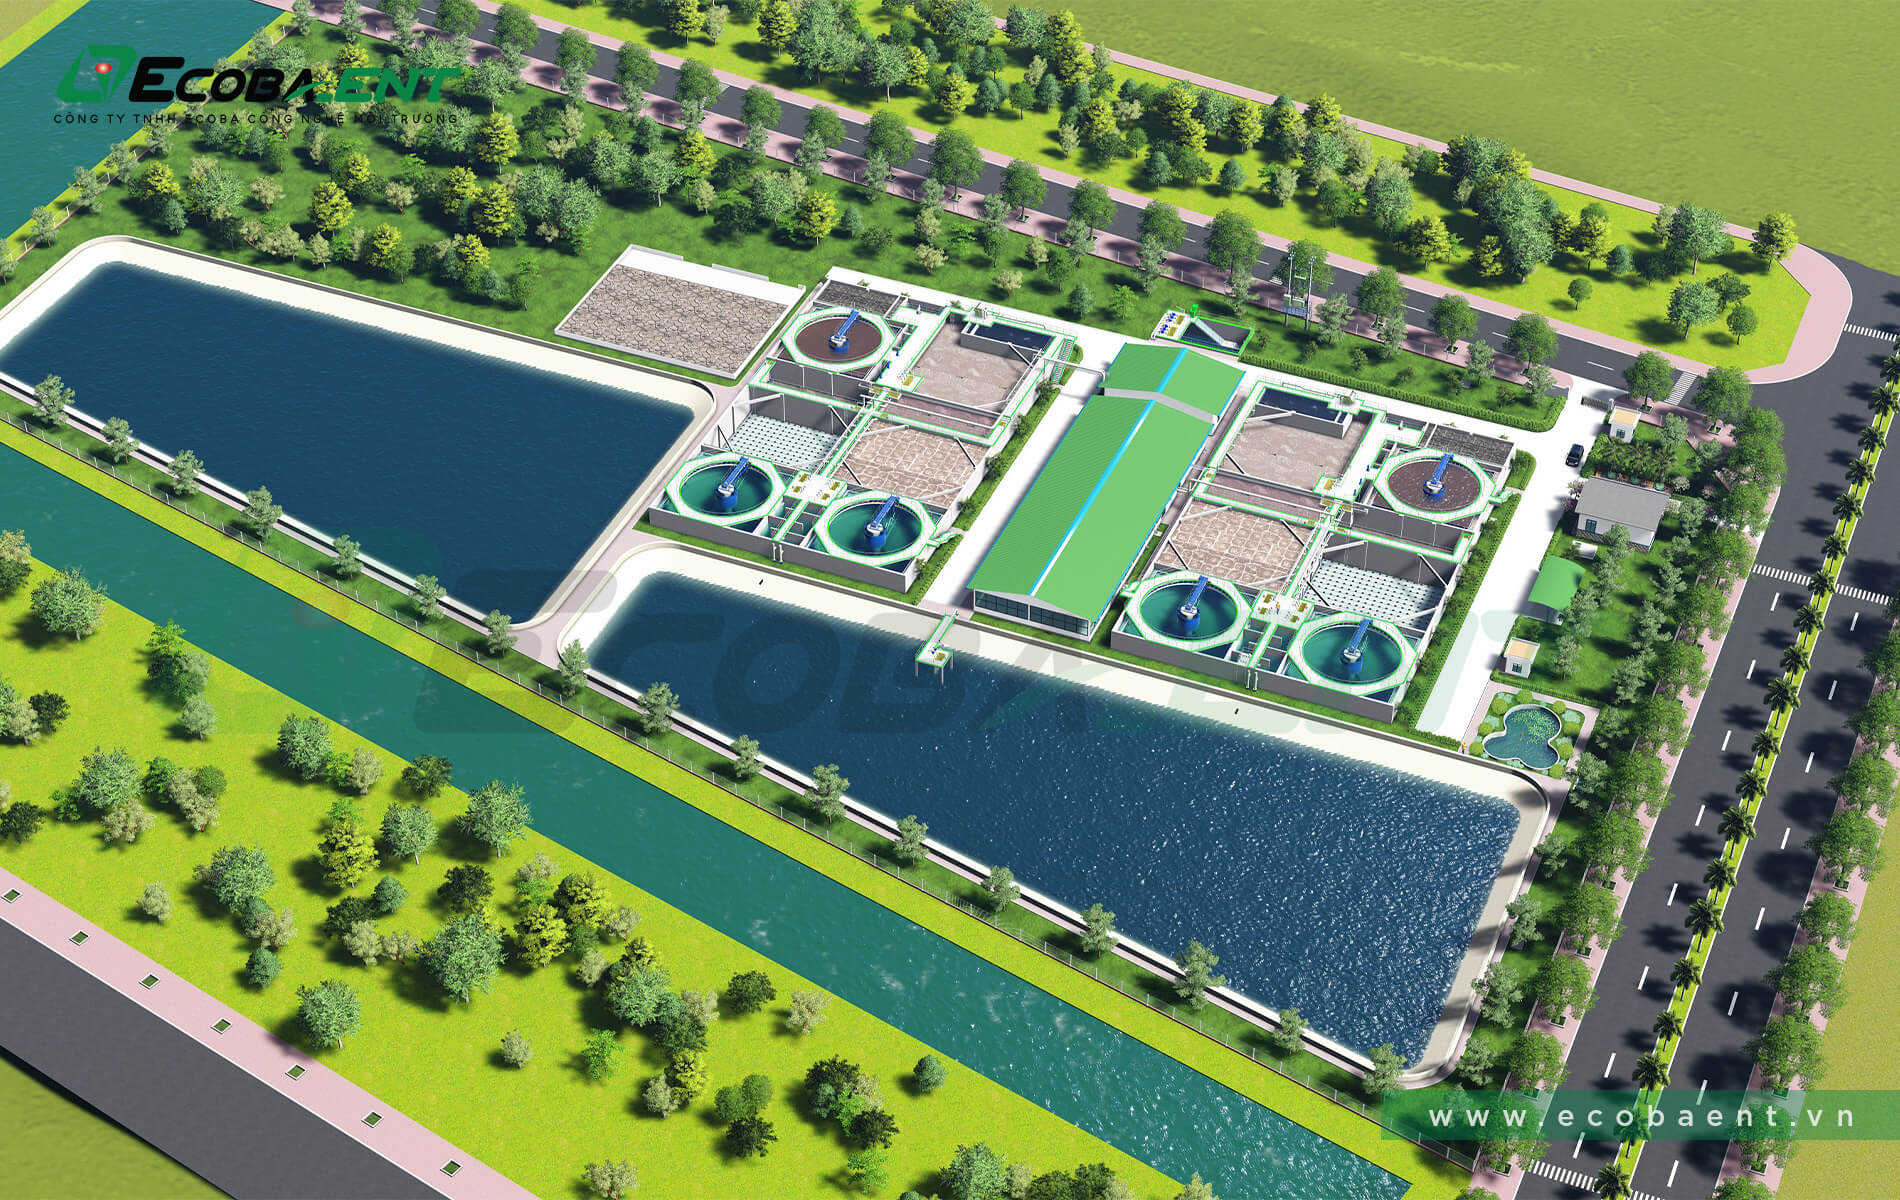 The centralized wastewater treatment plant for Yen Lu industrial park